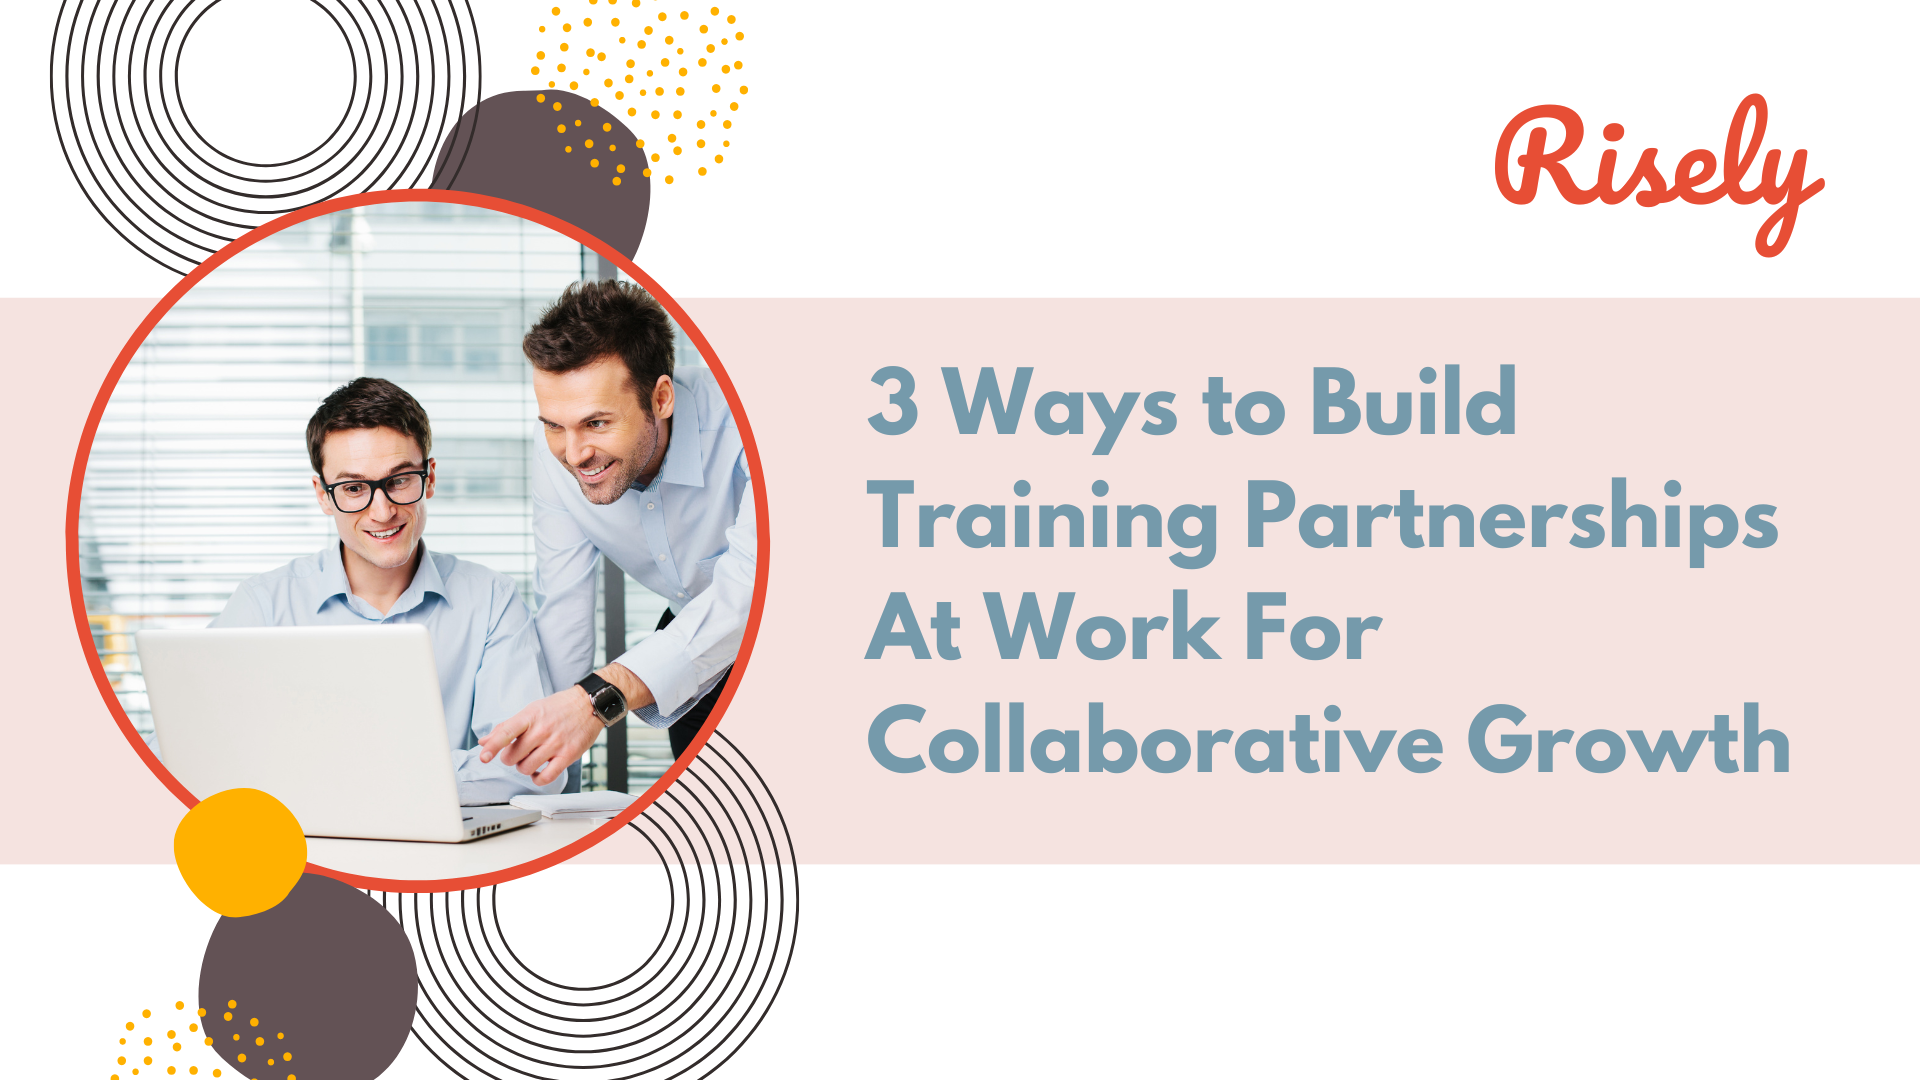 3 Ways to Build Training Partnerships At Work For Collaborative Growth